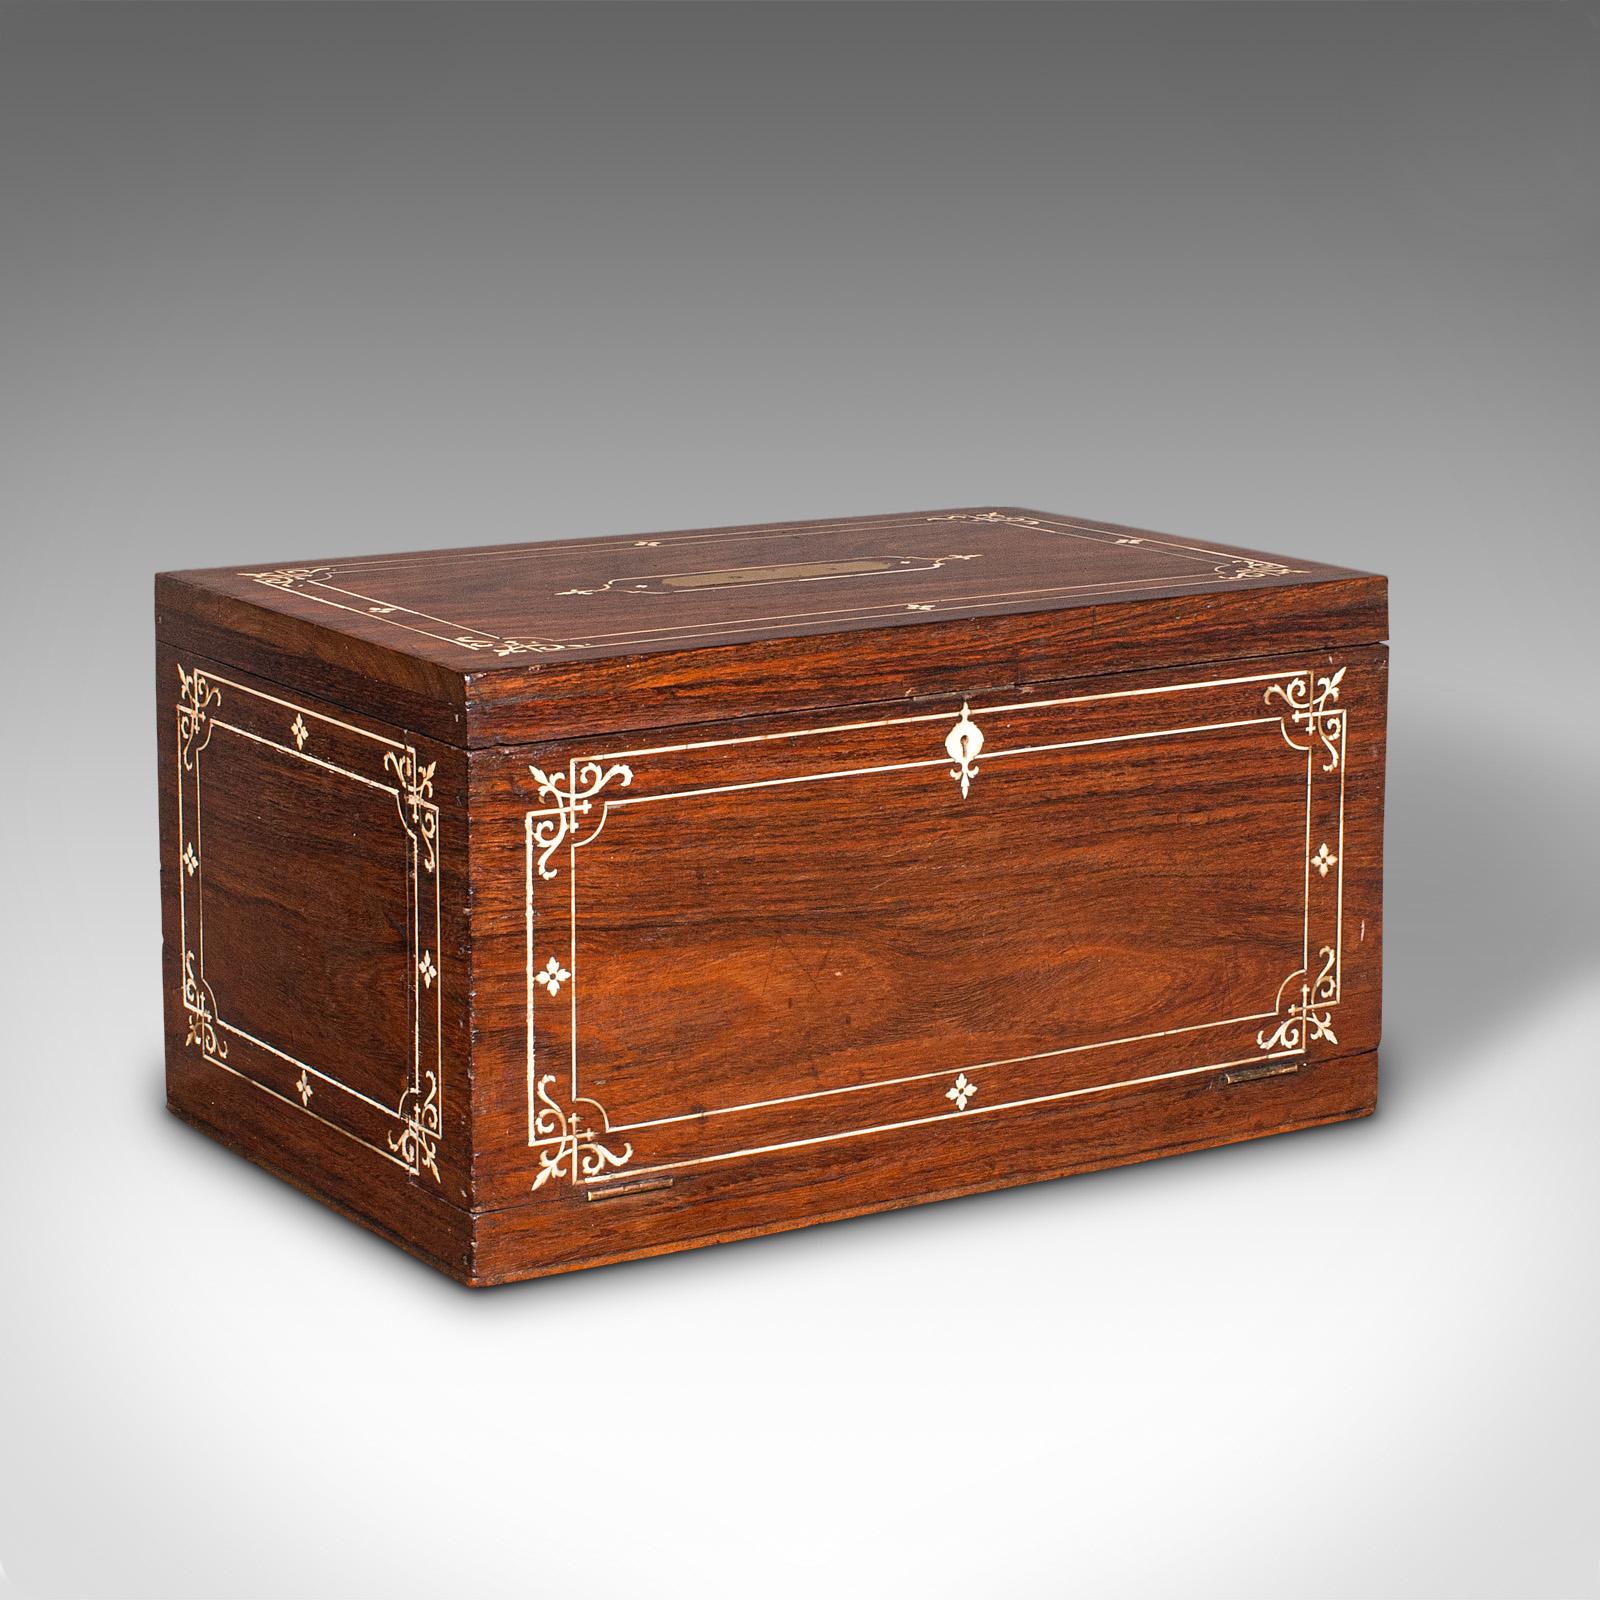 This is an antique campaign correspondence box. An Anglo-Indian, teak and bone inlaid colonial writing case with fitted interior, dating to the late Victorian period, circa 1900.

Enticing writing box with a delightful array of hidden